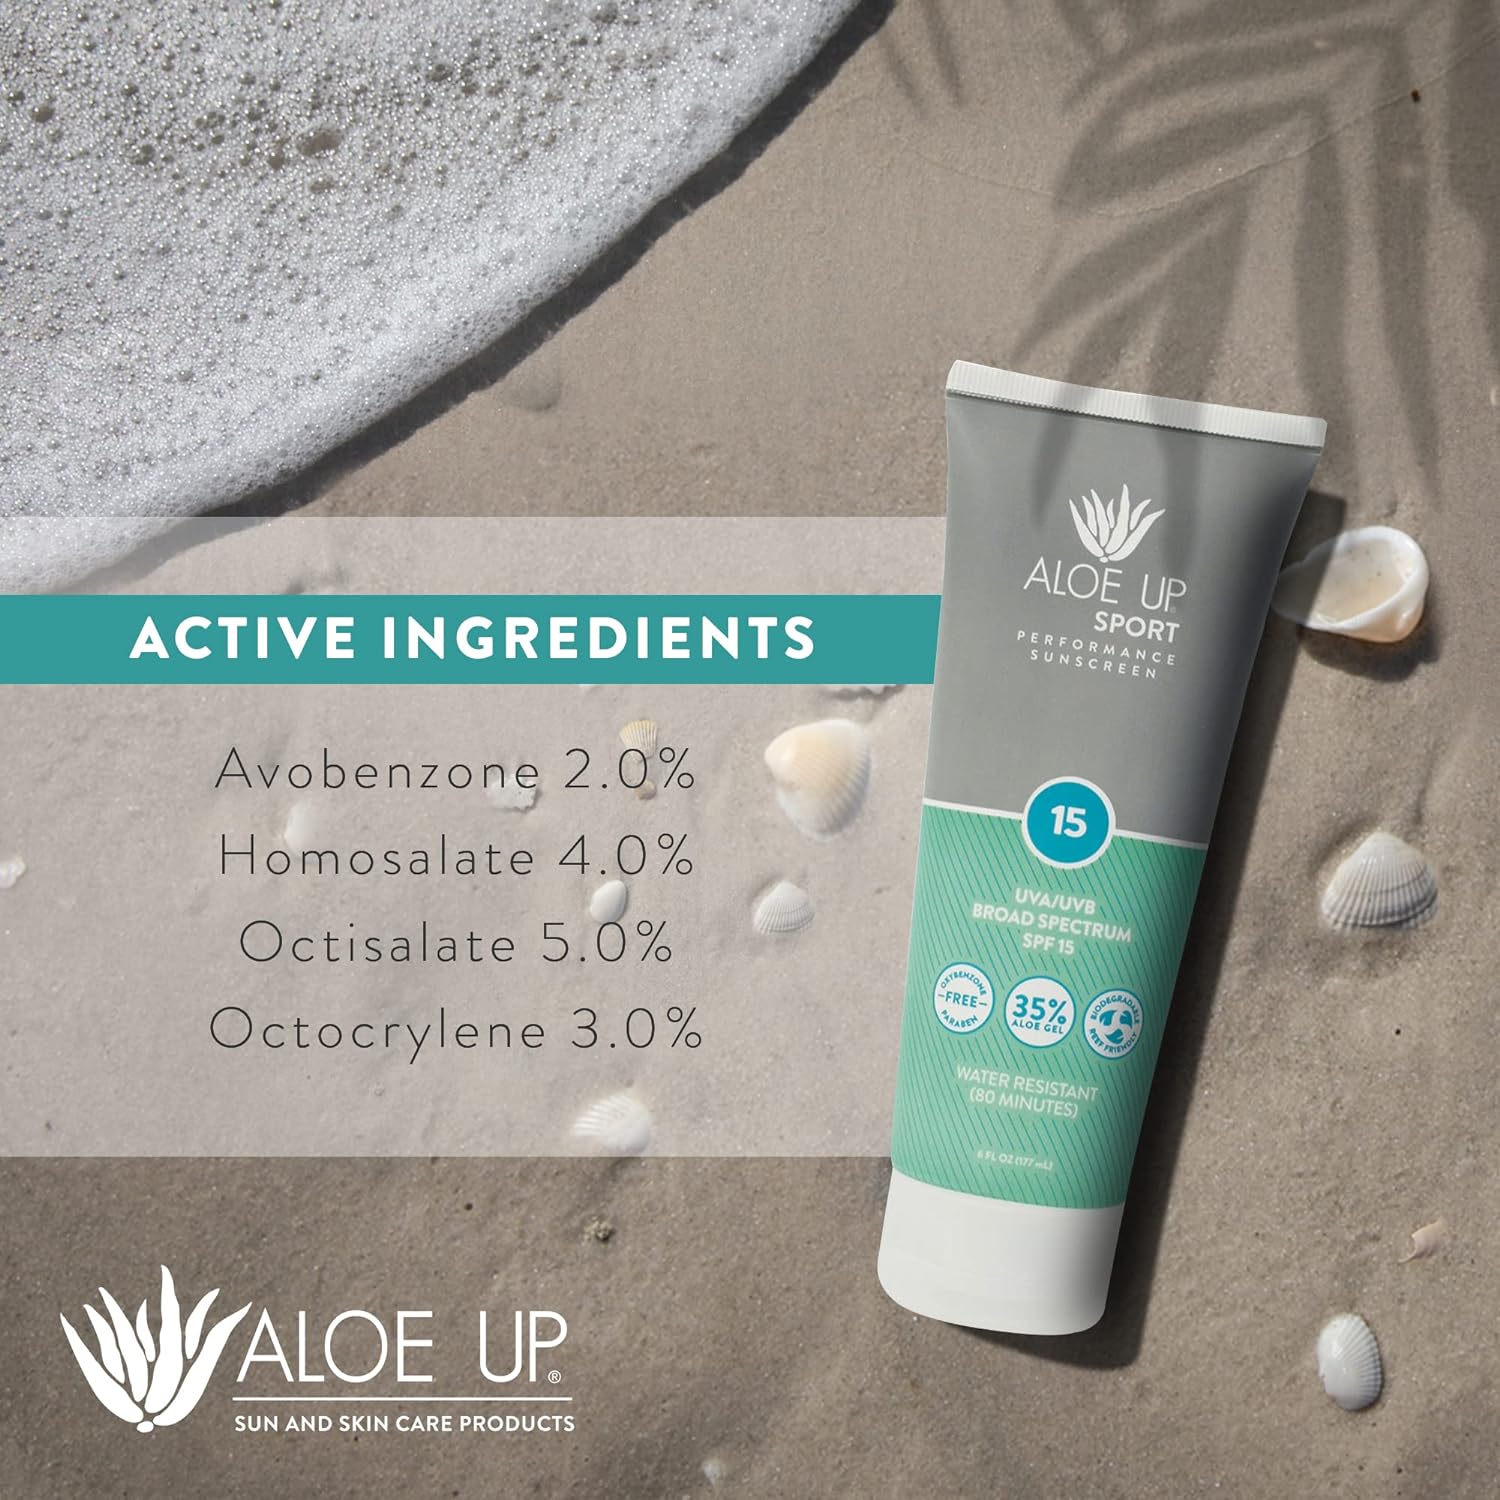 Aloe Up Sport Sunscreen Lotion SPF 15 - Broad Spectrum UVA/UVB Sunscreen Protector for Face and Body - With Hydrating Aloe Vera Gel - Non-Greasy - No White Cast - Reef Safe - Fragrance-Free - 6 Oz : Beauty & Personal Care